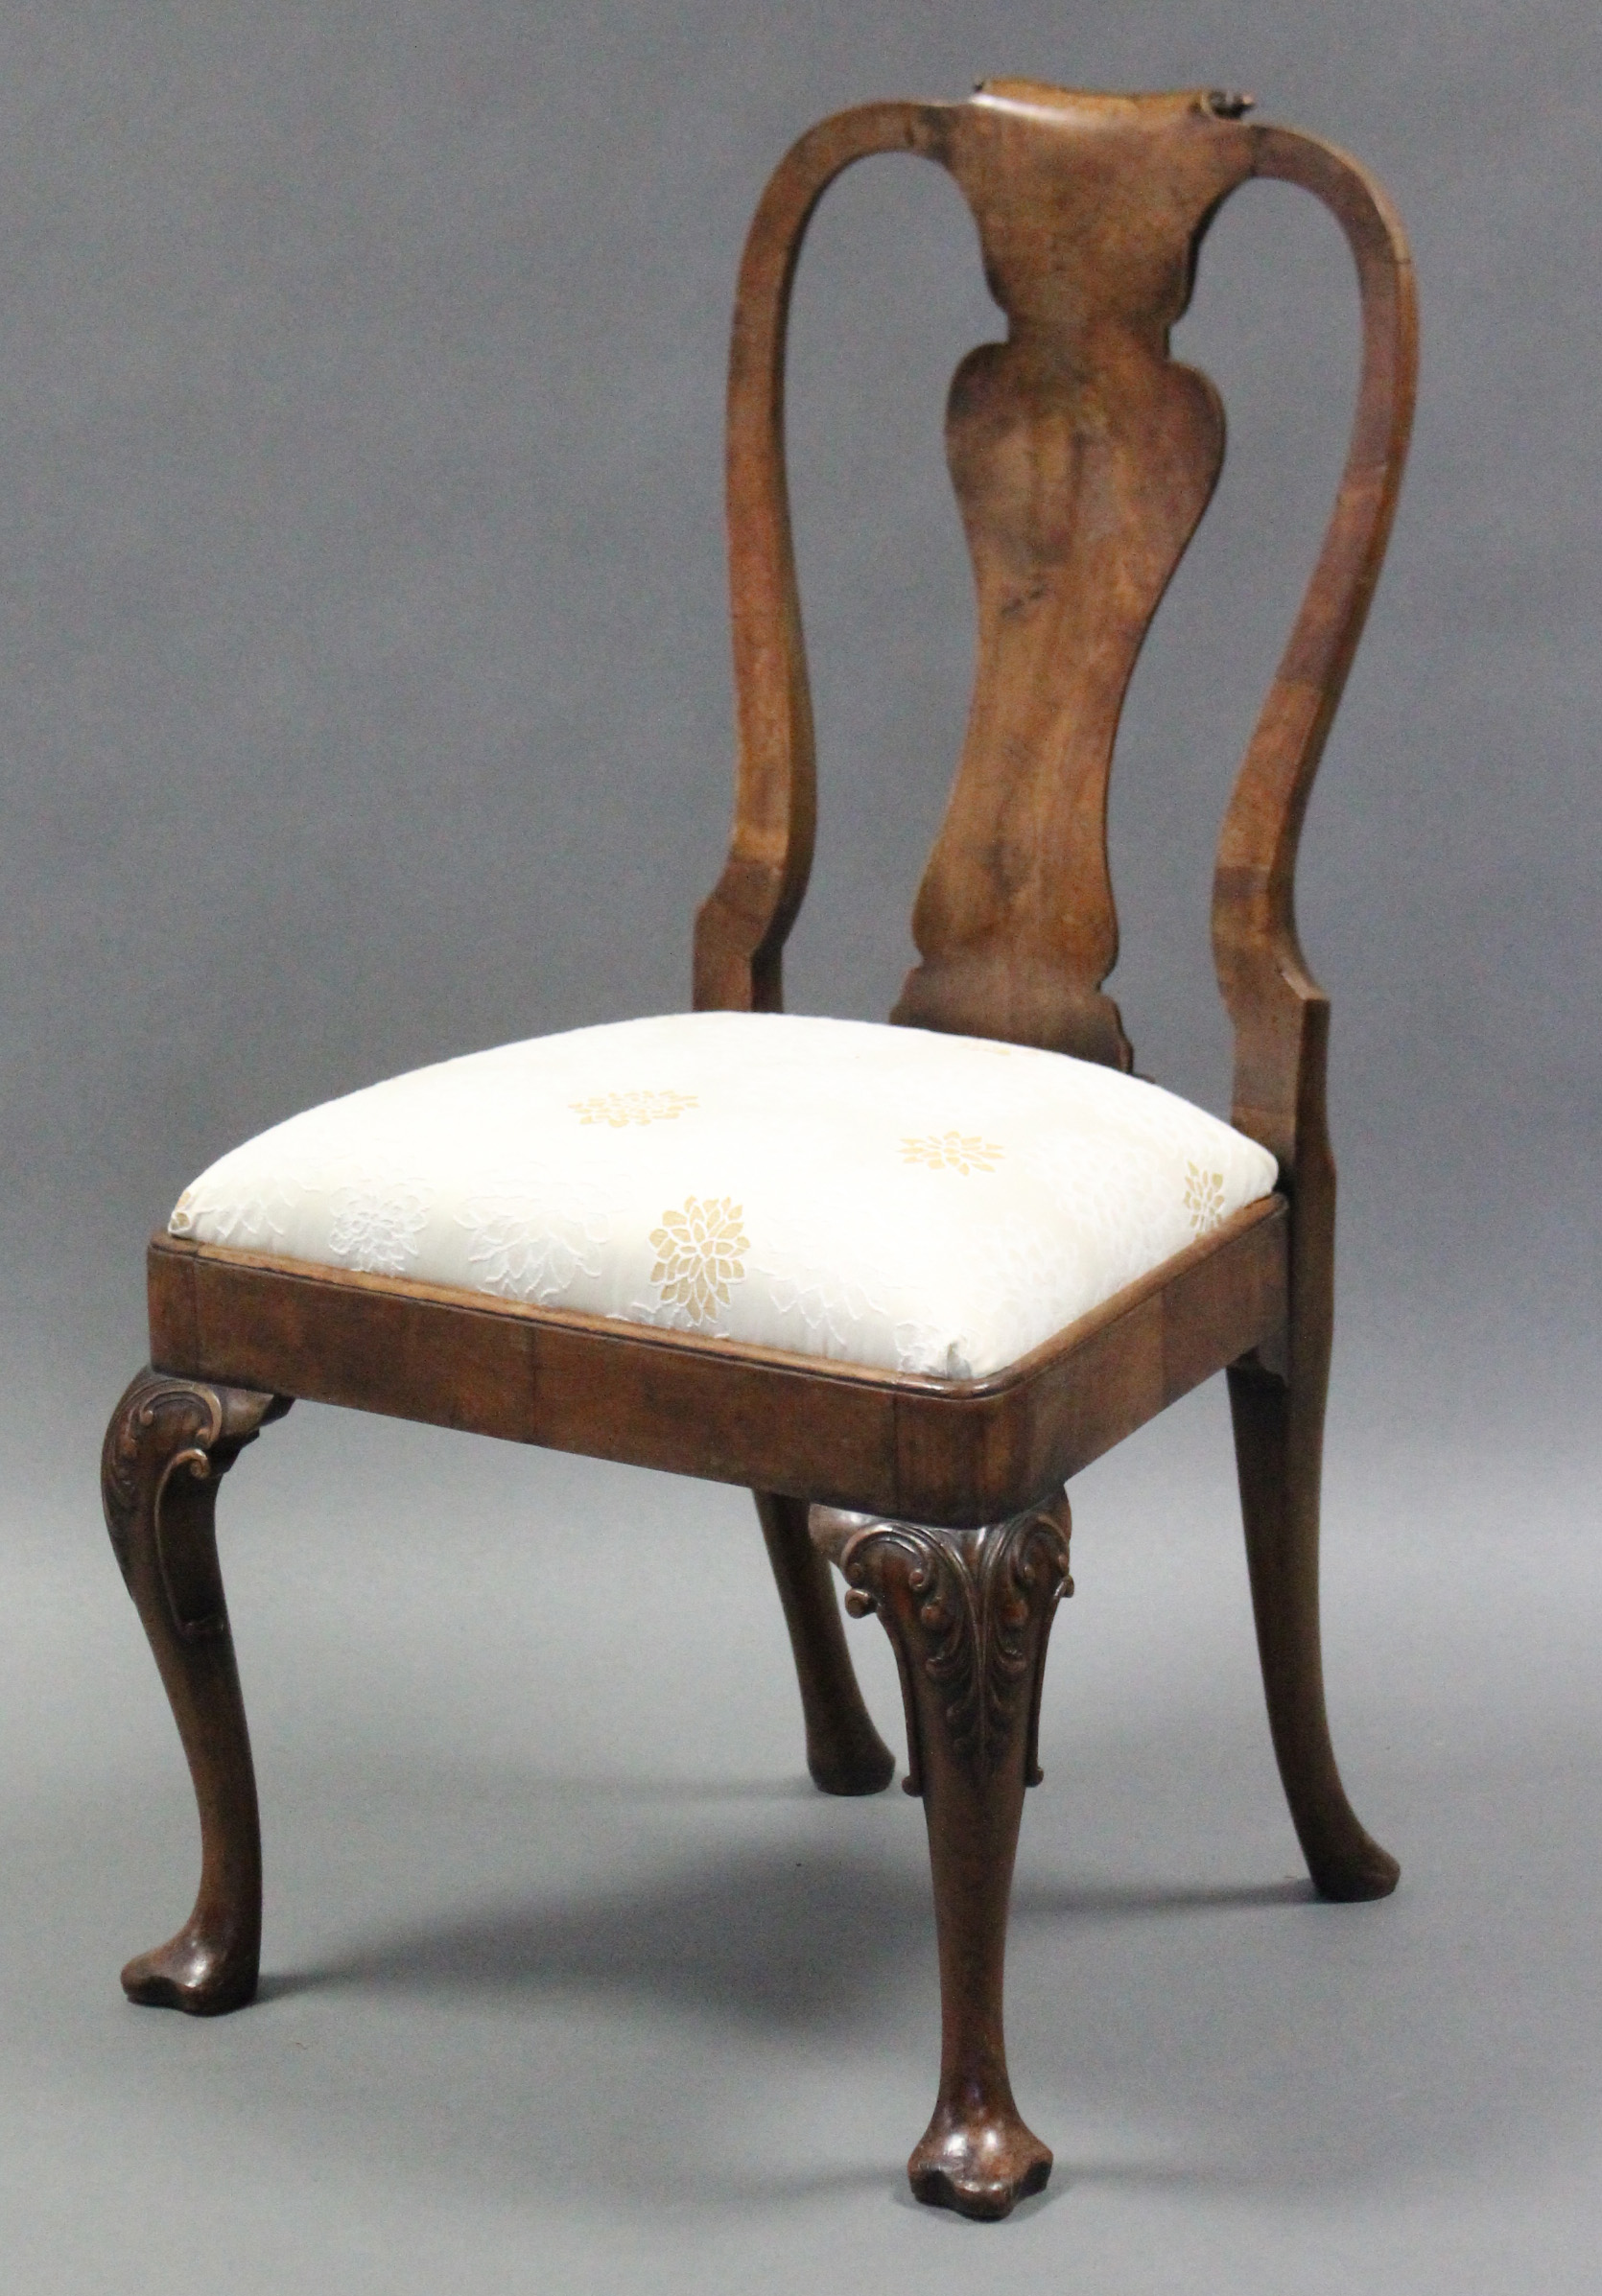 A George I style walnut dining chair with shaped splat back, padded drop-in seat & carved cabriole